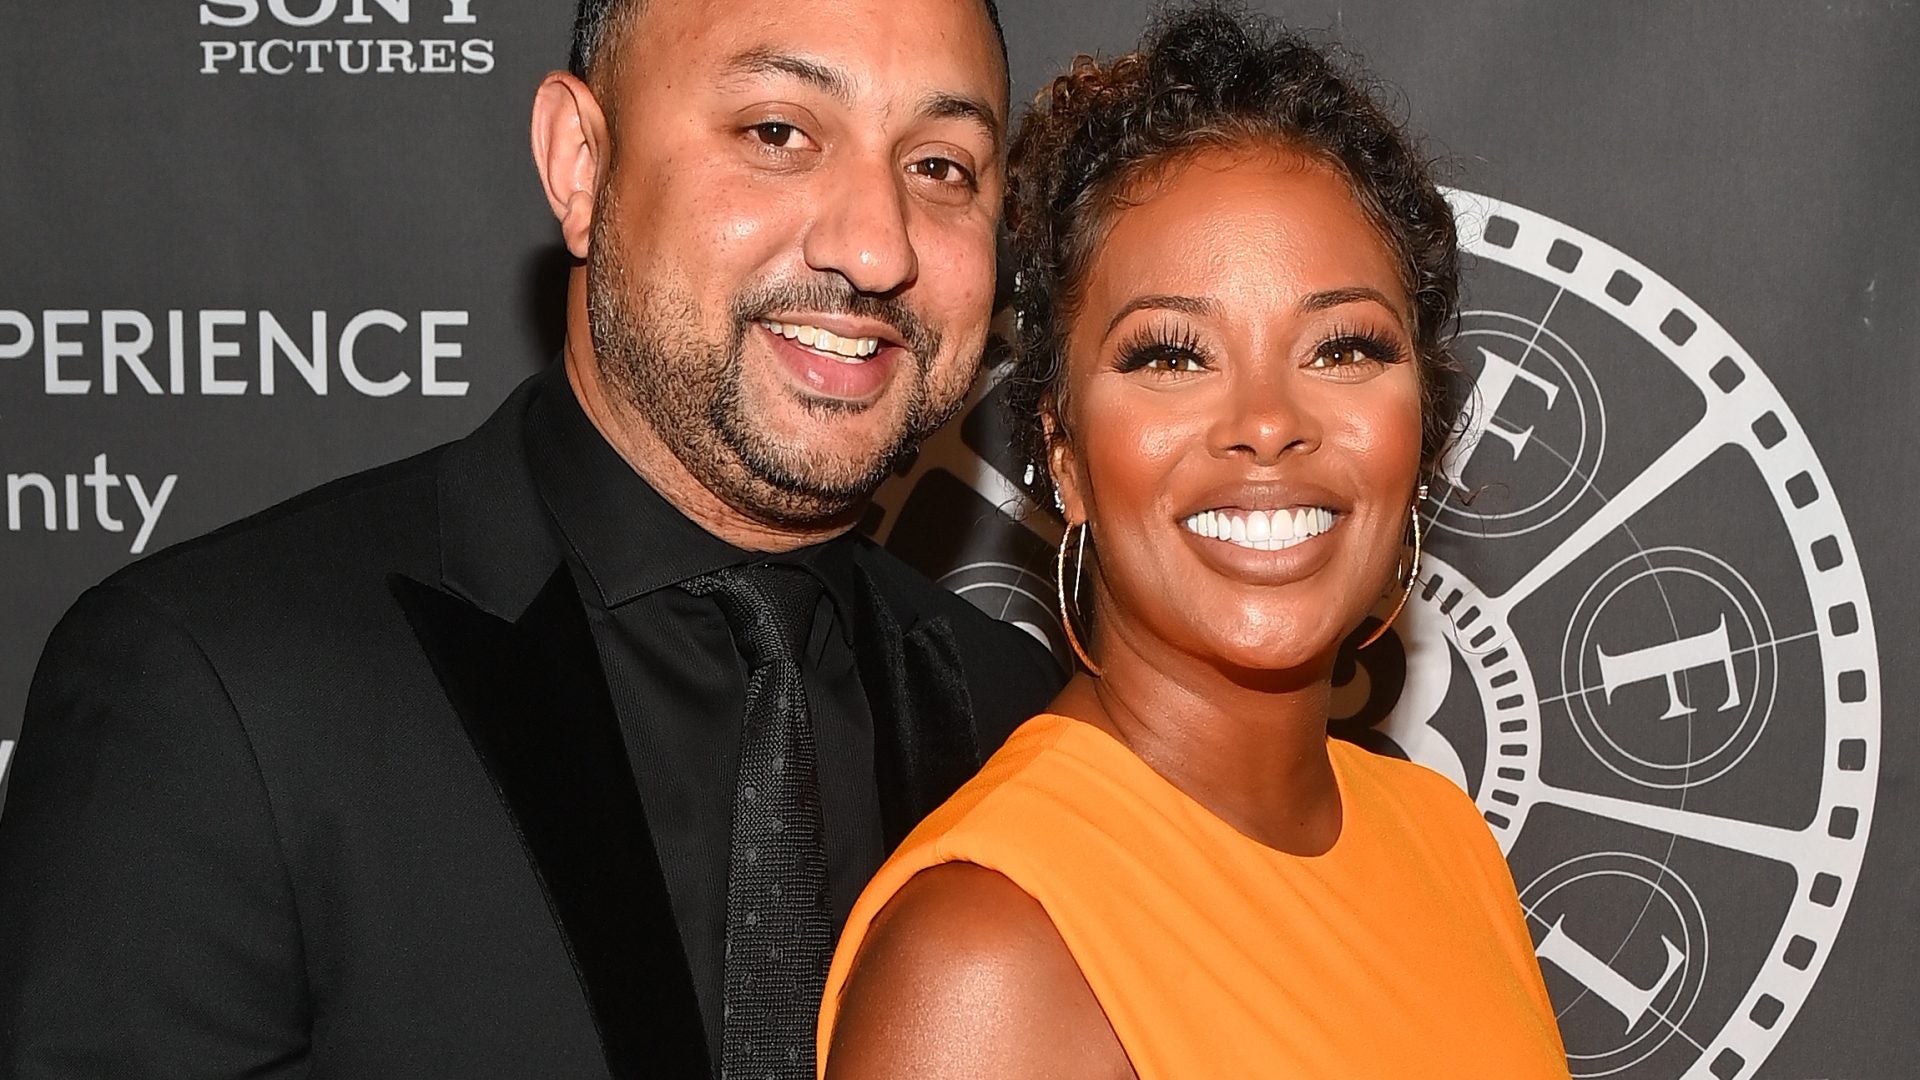 Eva Marcille’s Husband Michael Sterling On Their Divorce: ‘I Am Going To Fight For Her With Every Fiber In My Being.’